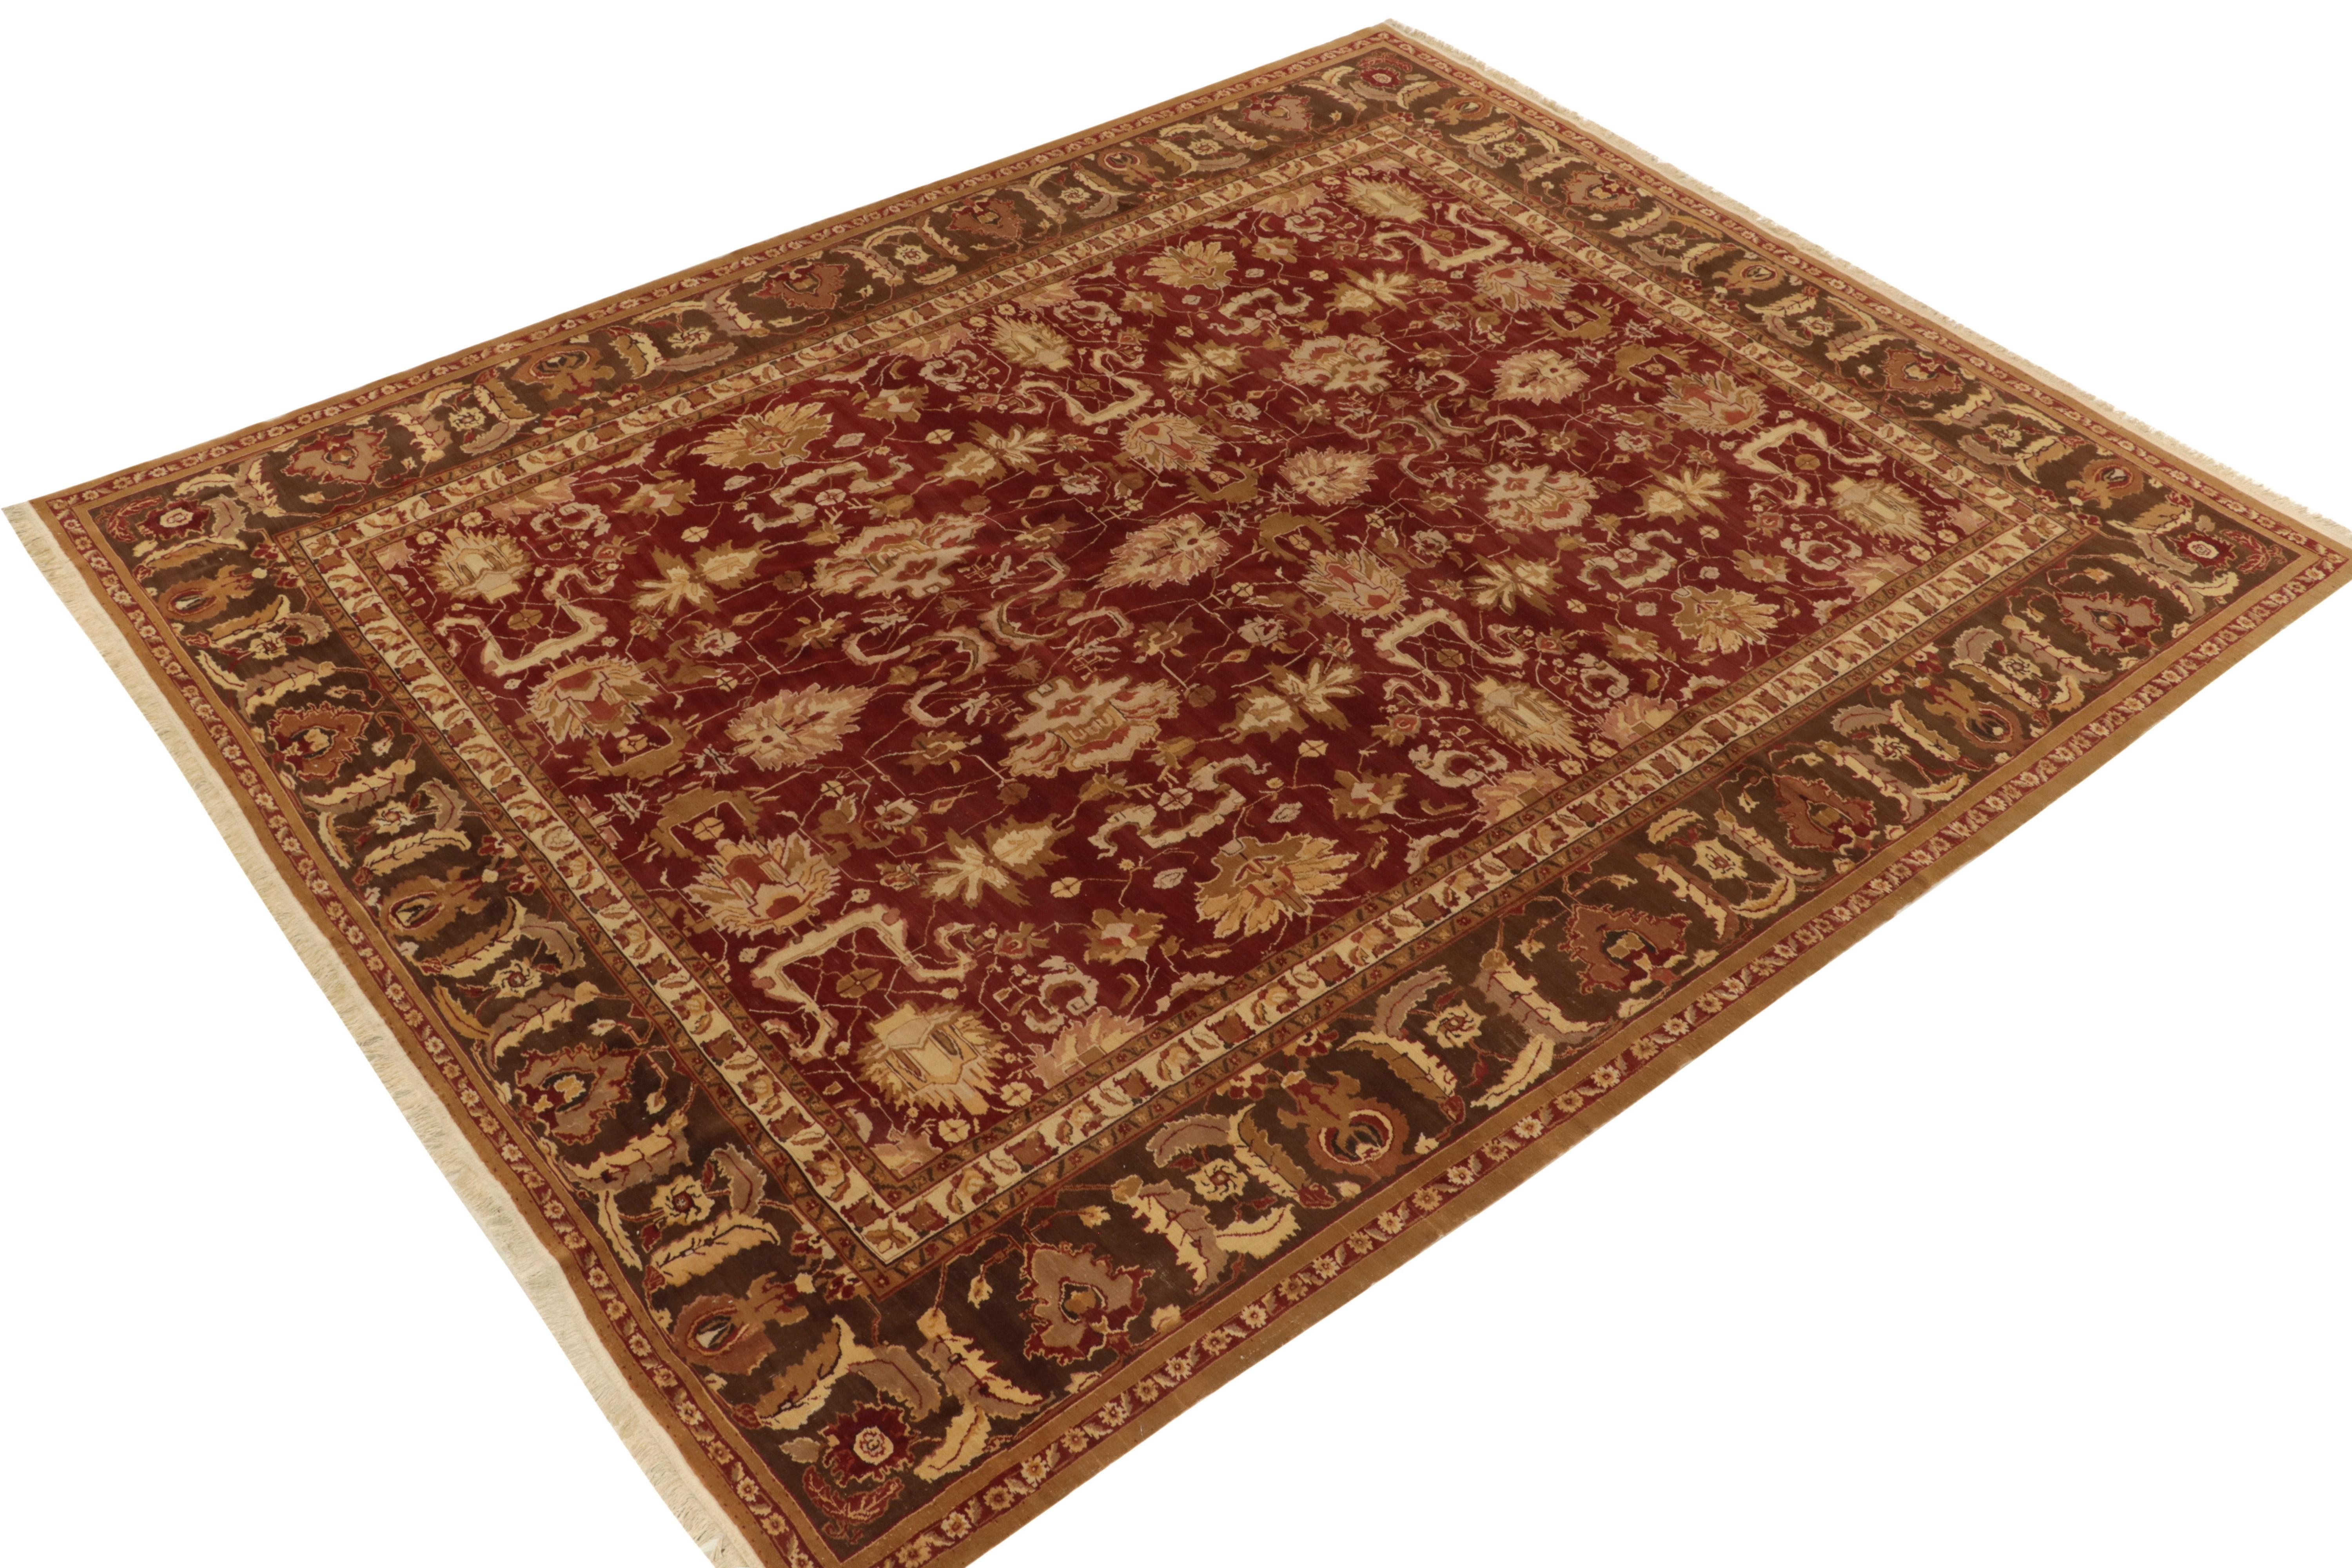 Hand-knotted in all wool, an Agra inspired floral rug relishing gorgeous striations on a 9x12 frame. The floral palmette motifs & cloudbands in rich red & brown enjoy kisses of beige & peach complementing the handsome geometry on the gracious scale.